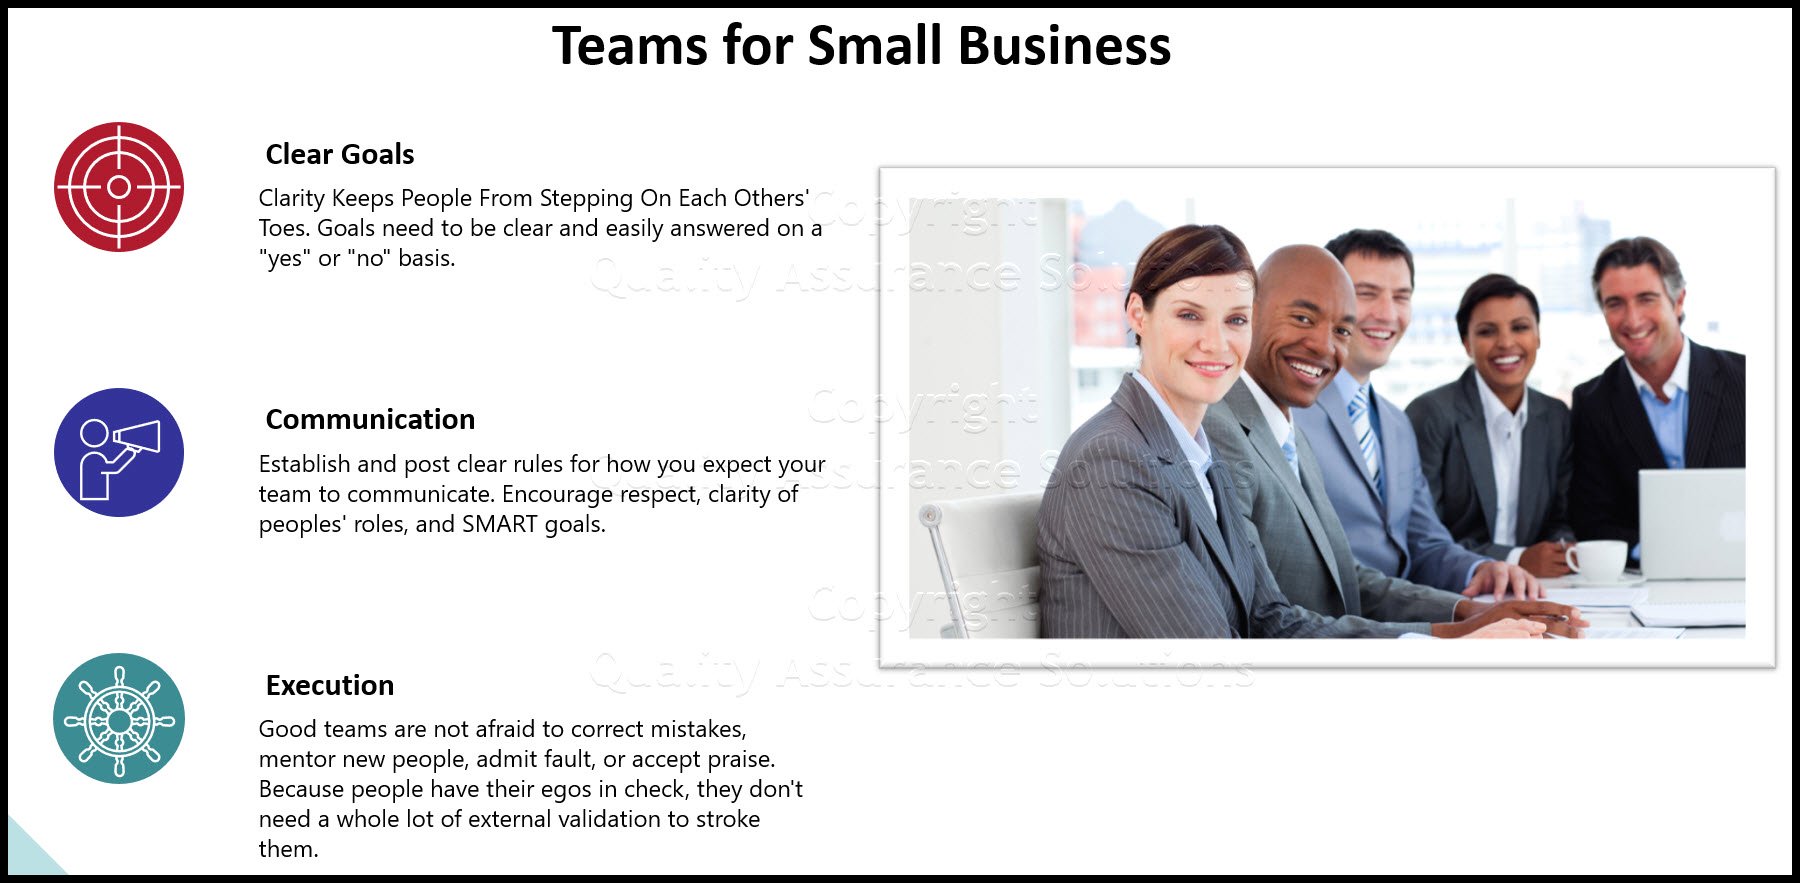 Team building techniques that work everyday in small businesses. Building a strong team is a matter of who first, then what later.